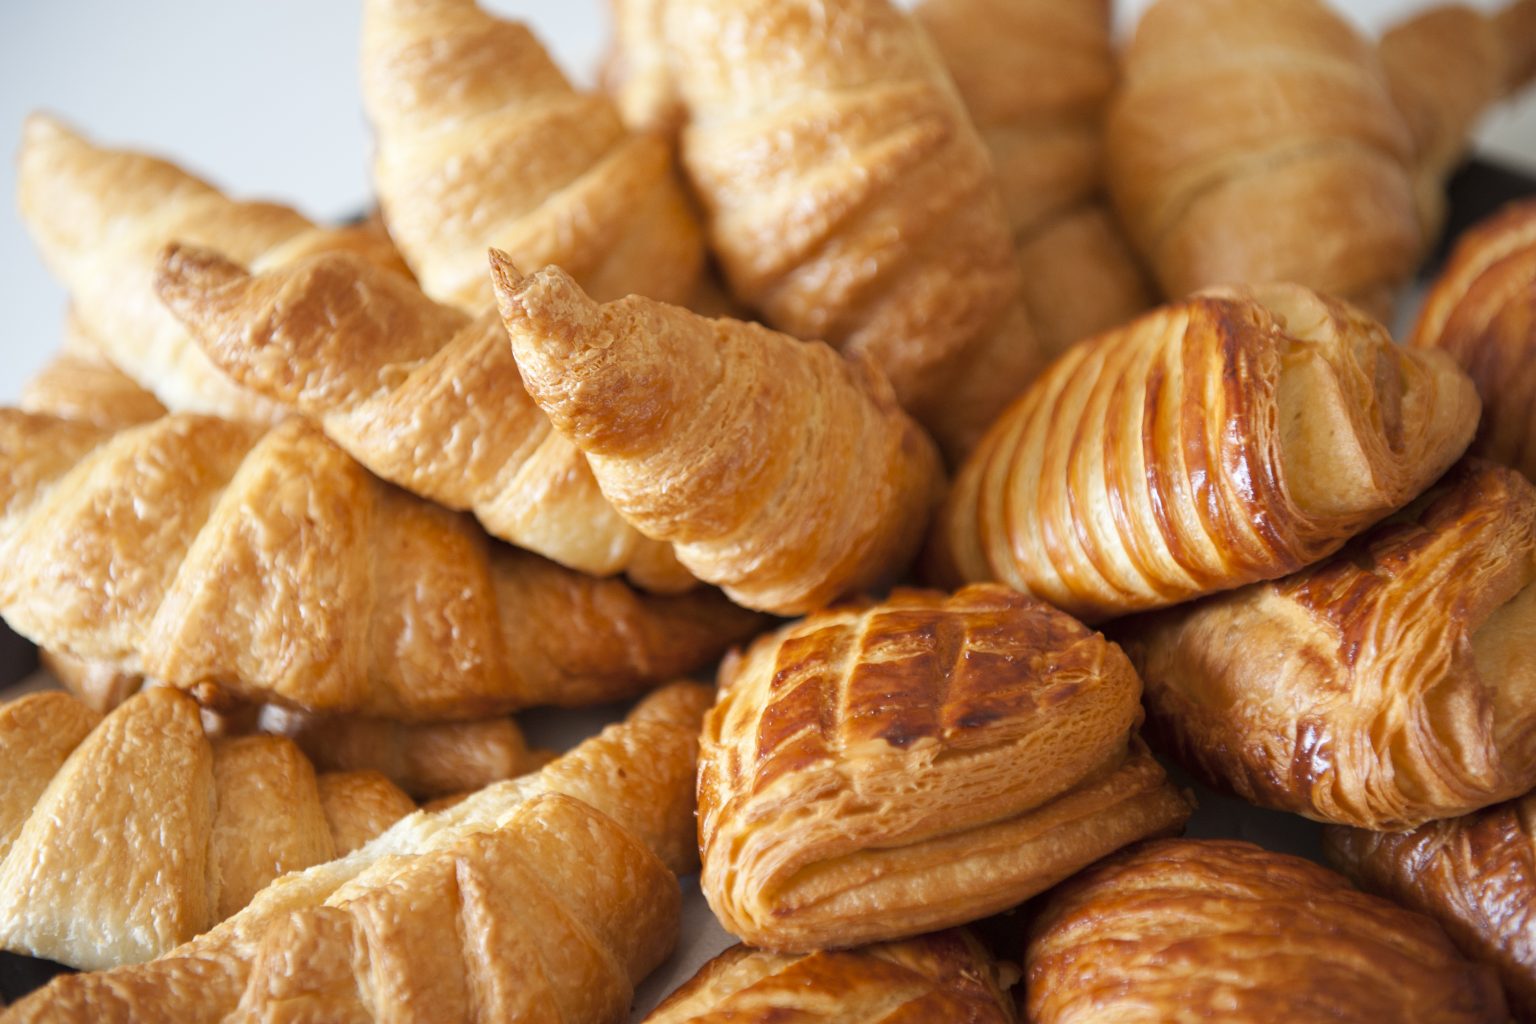 Assorted croissants, brioche, and pastries